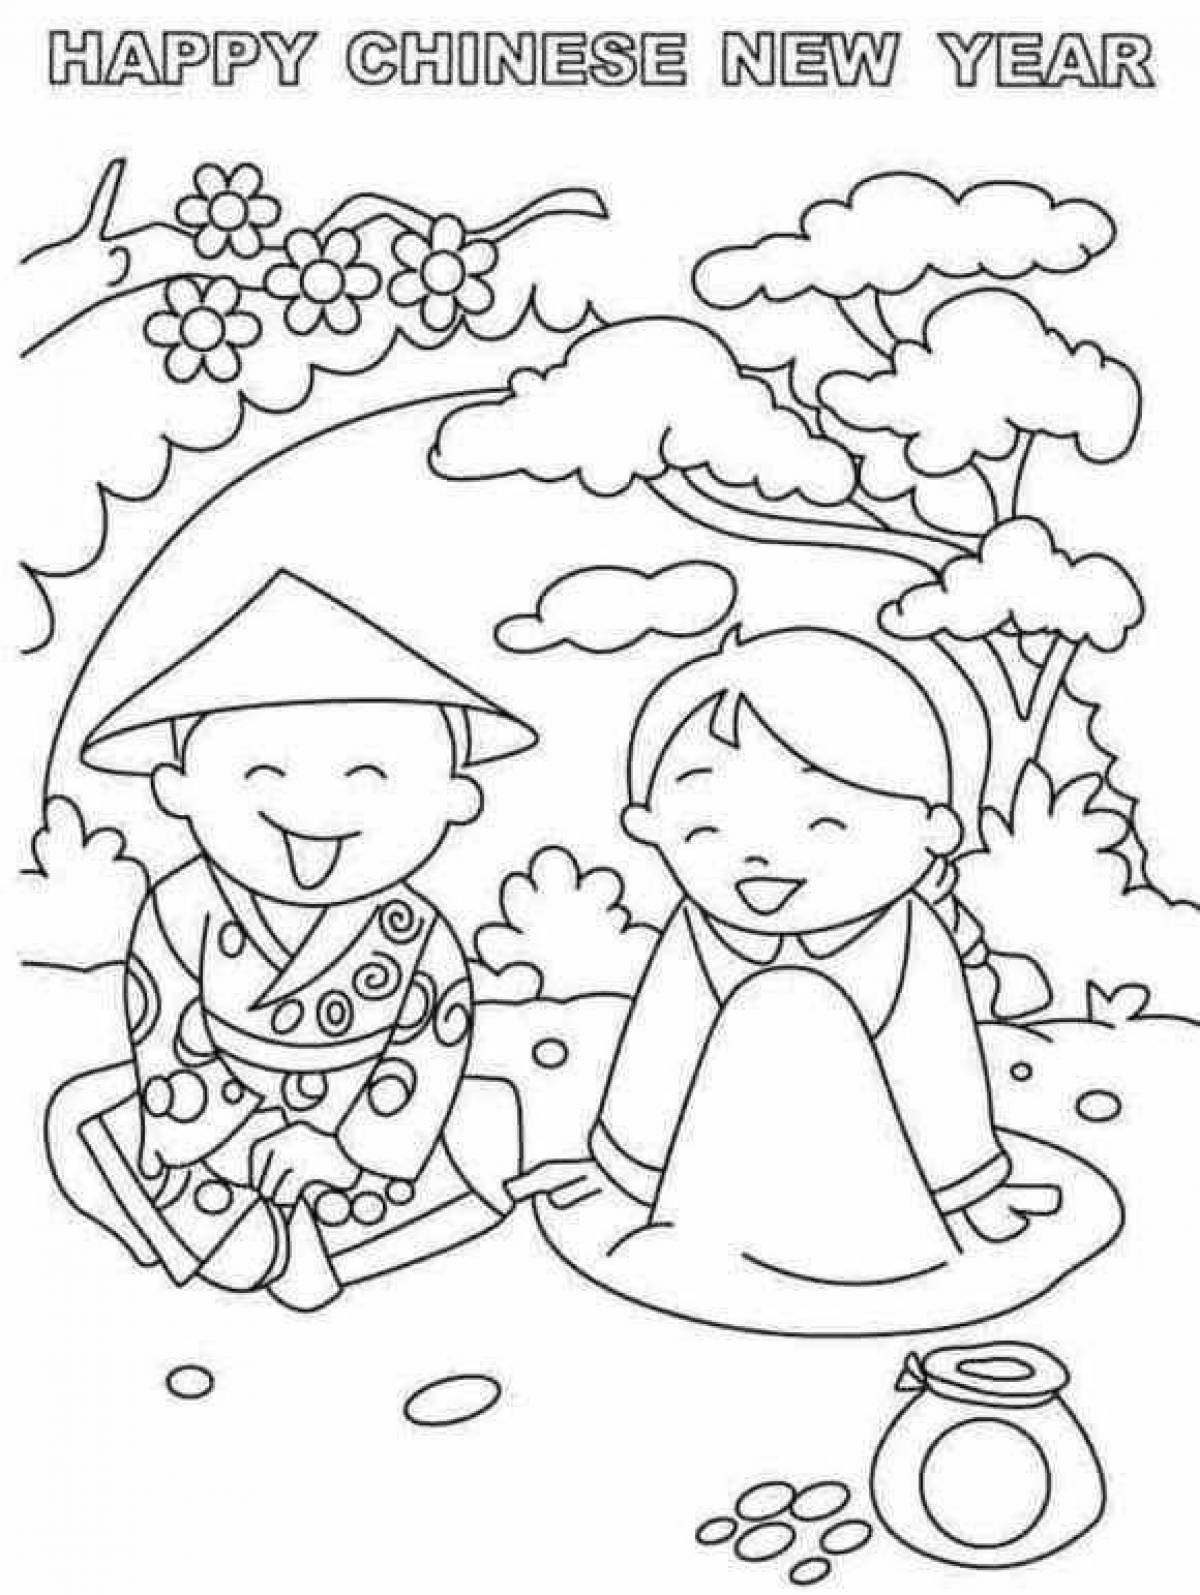 Chinese New Year Vibrant Coloring Book